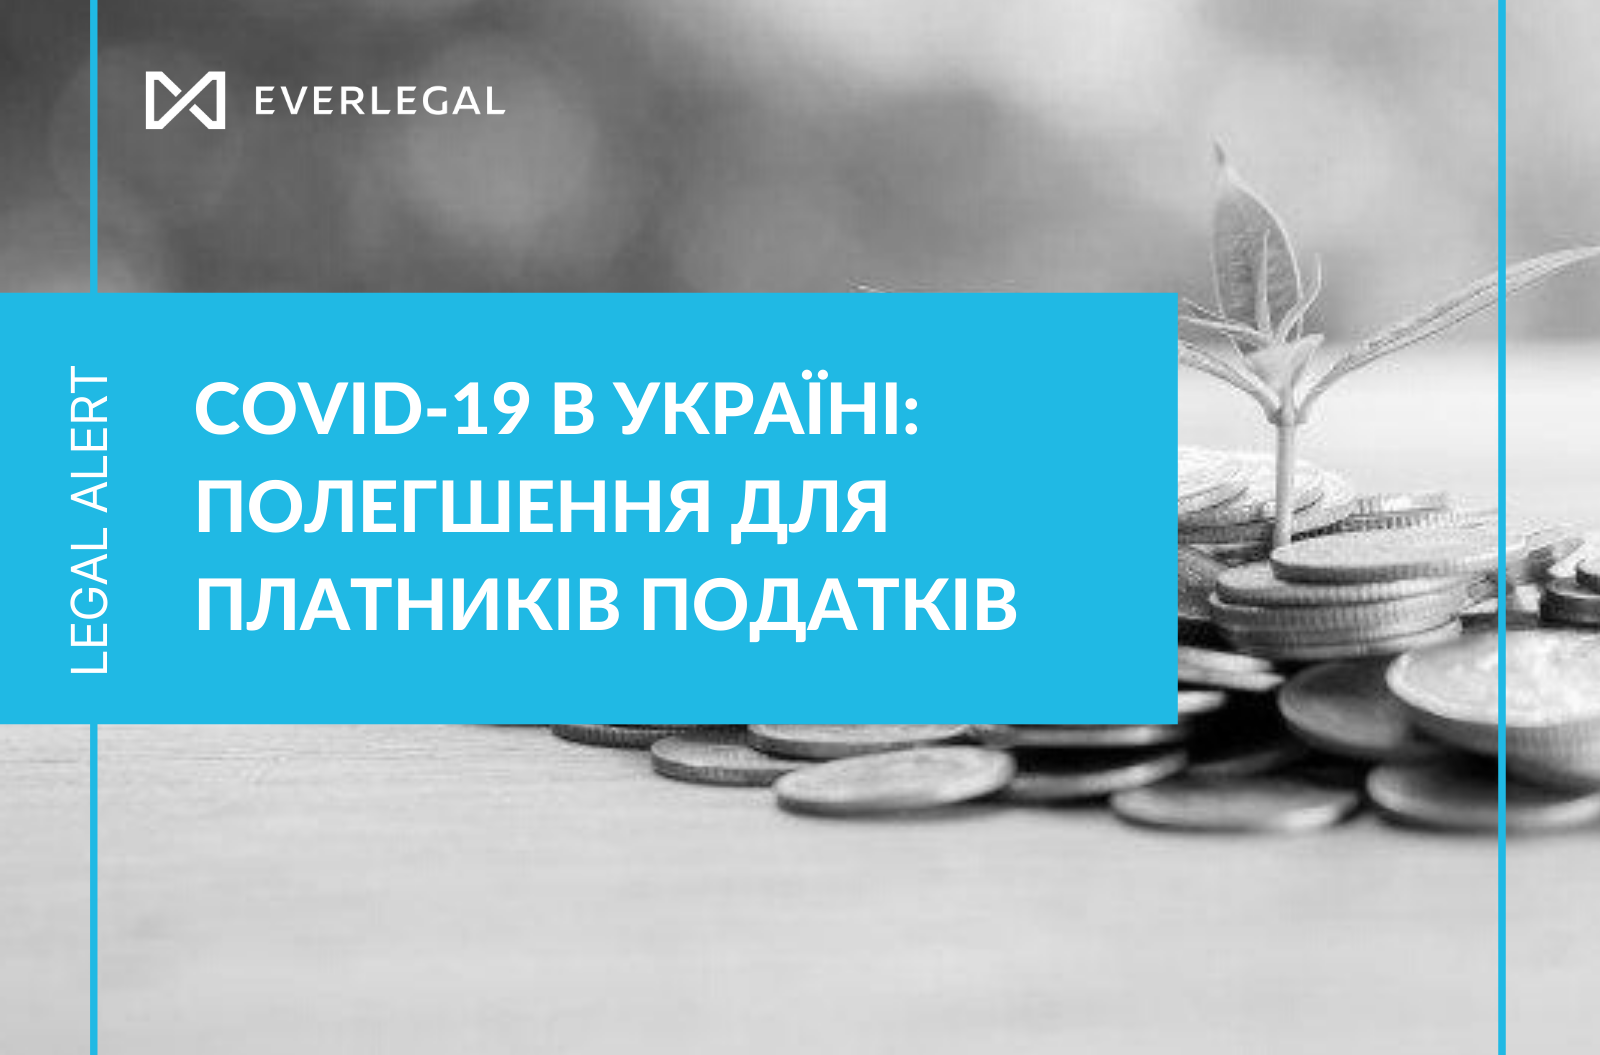 COVID-19 in Ukraine: benefits for tax payers